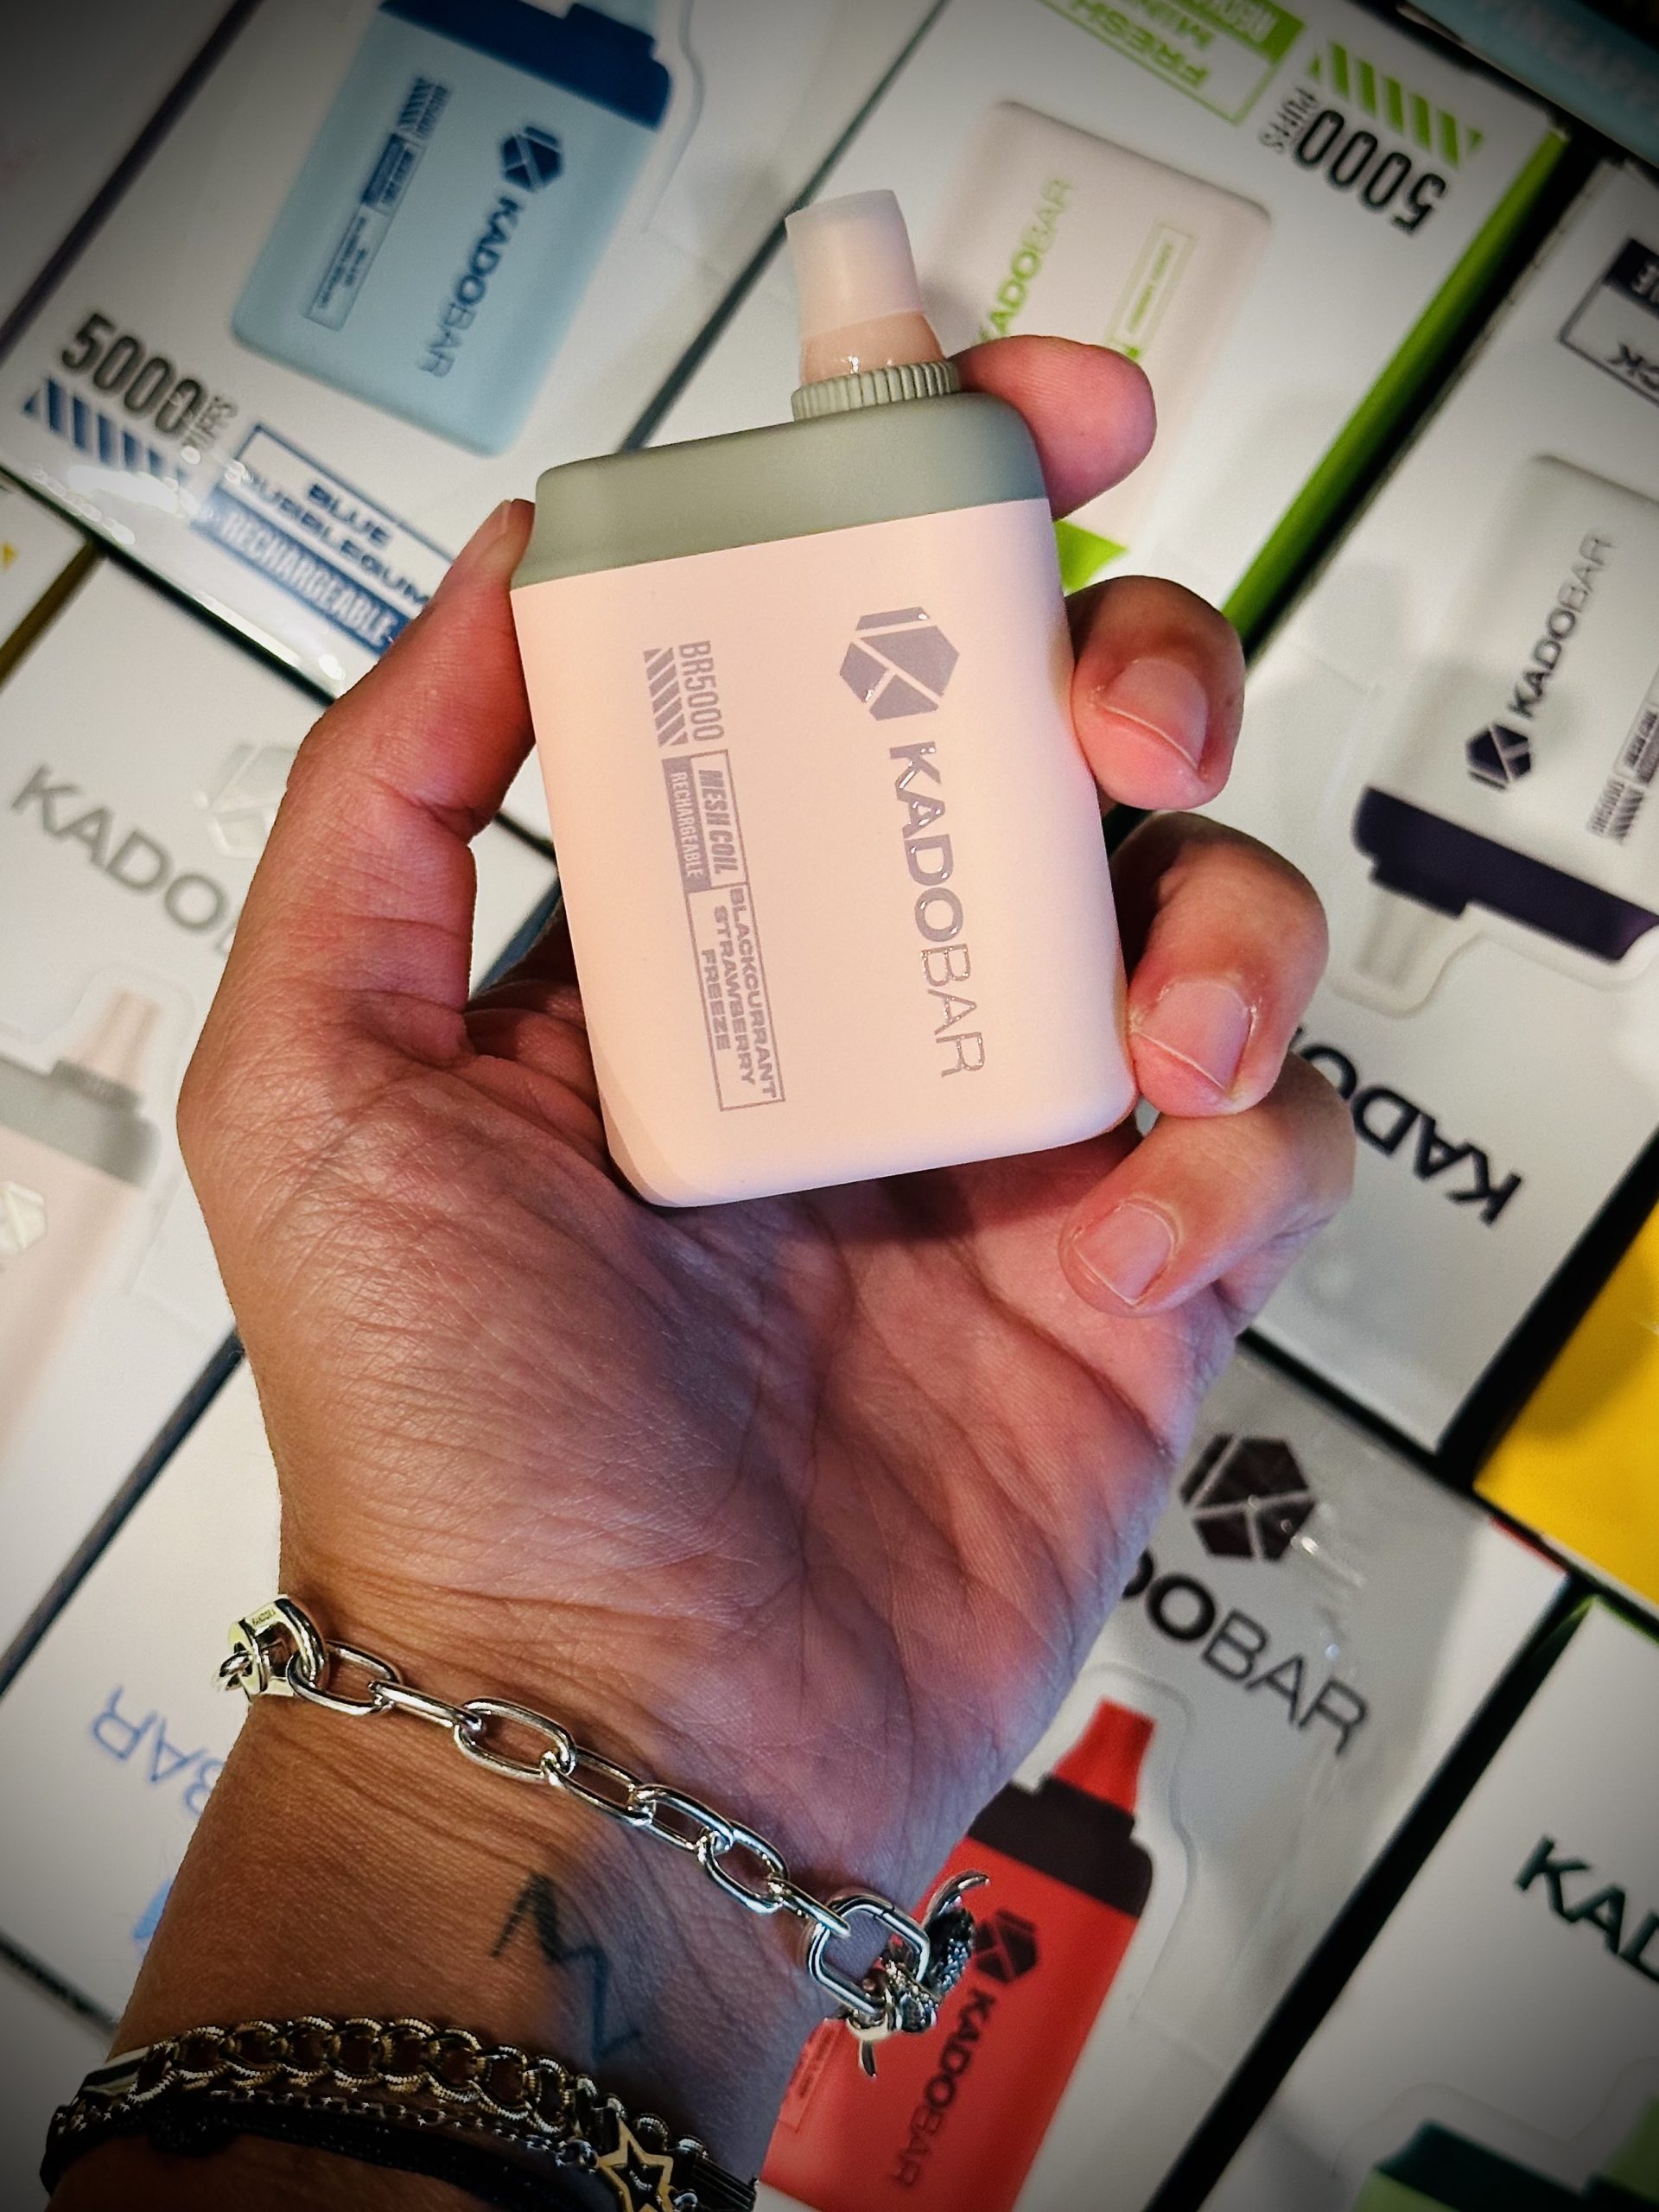 A close-up image of a person's hand holding a beige Kado Bar disposable vape device against a background of various Kado Bar packages. The hand is adorned with a silver chain bracelet and the vape has a minimalist design with the Kado Bar logo and product information on it. The surrounding boxes have "5000 PUFFS" prominently displayed, indicating the product's usage capacity.